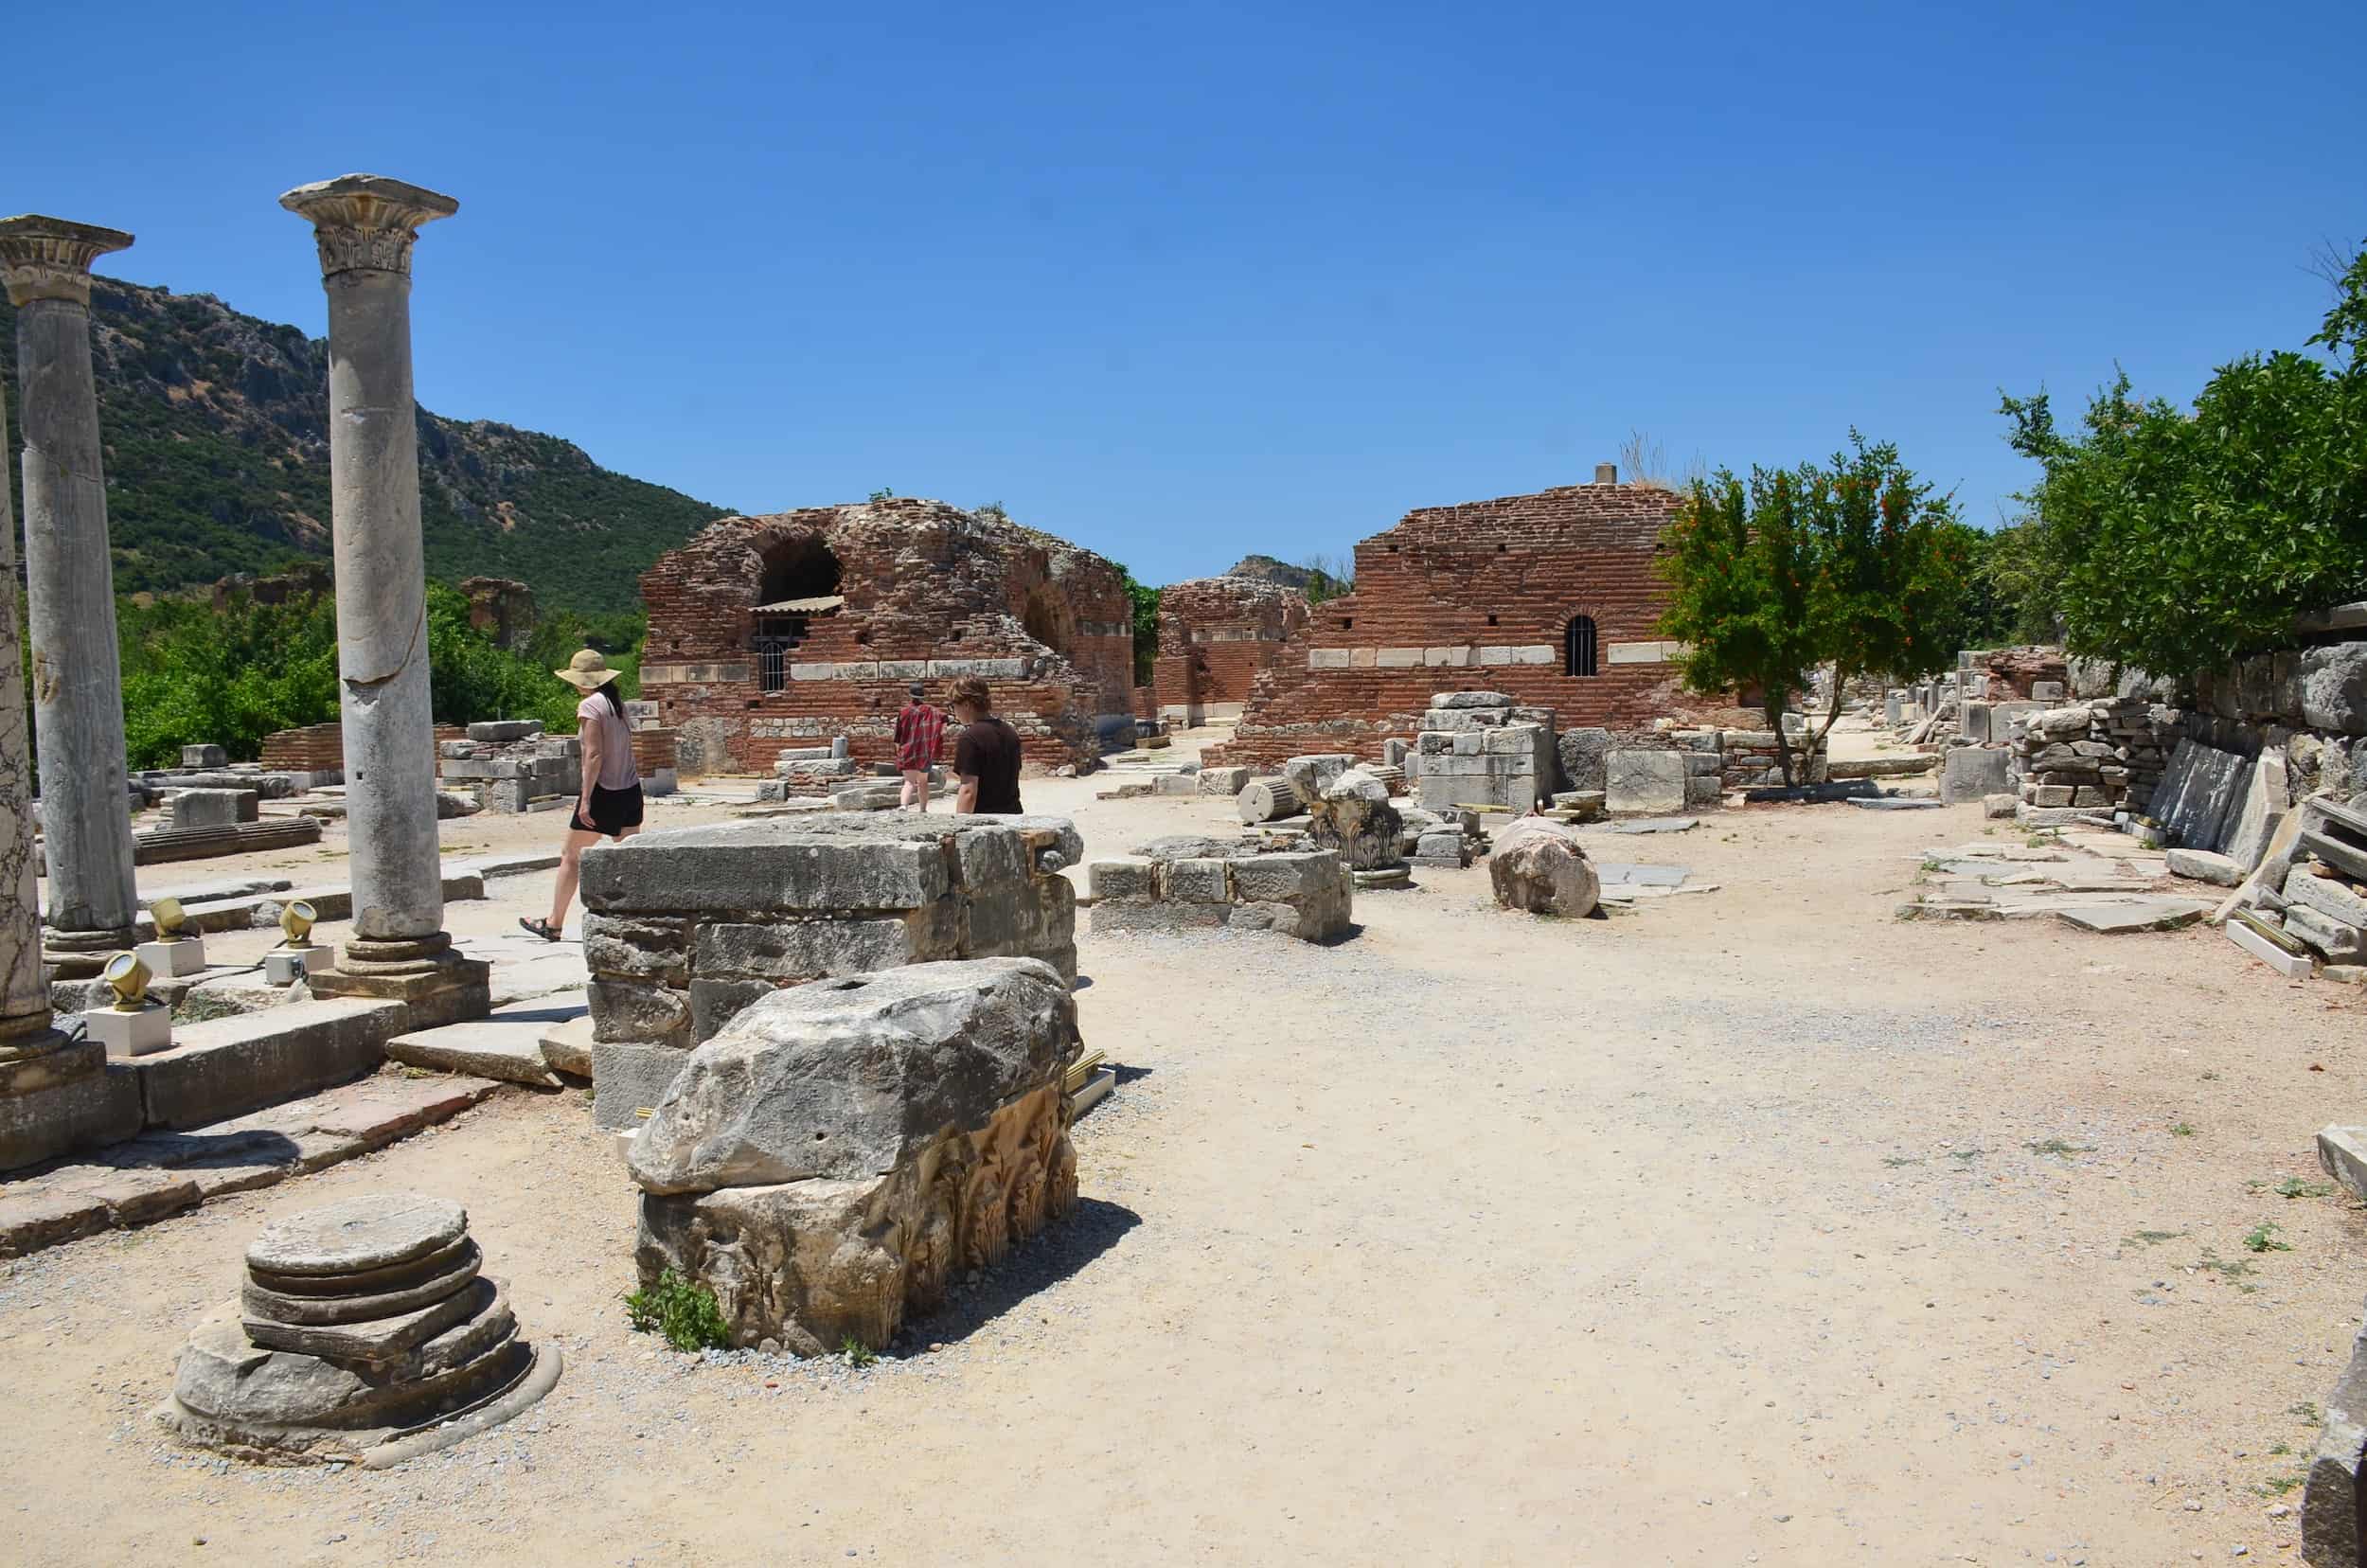 Pillared church in the eastern part of the original nave at the Church of Mary at Ephesus